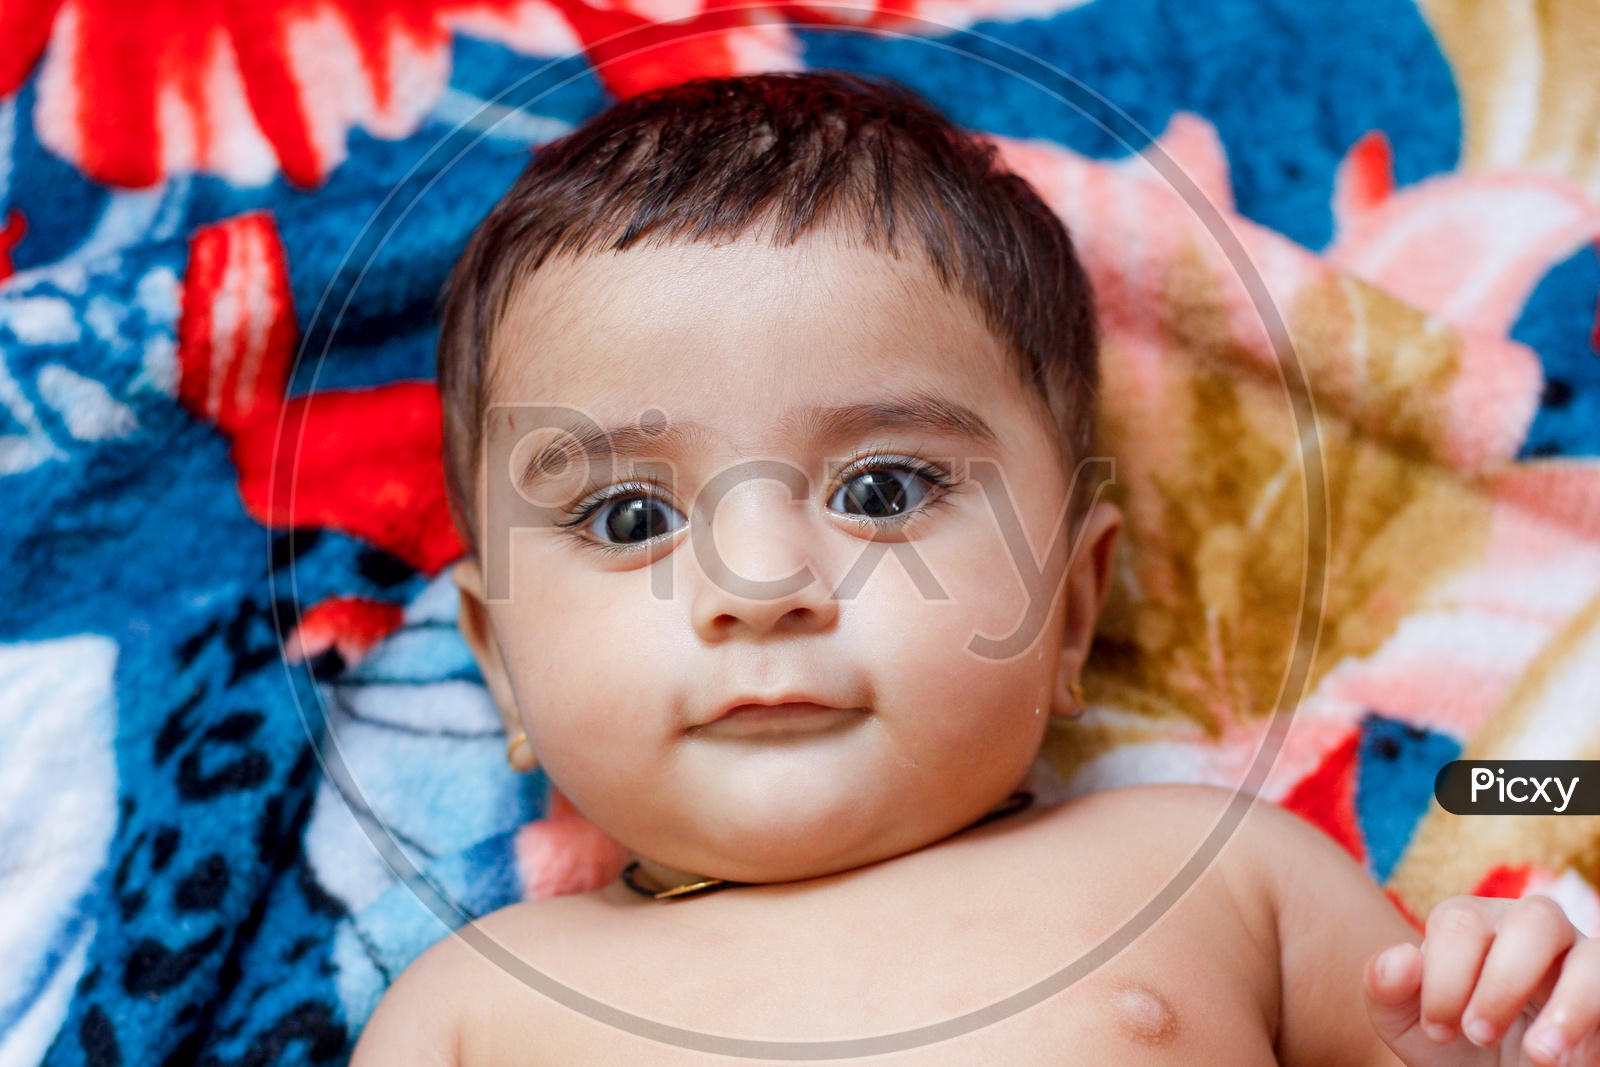 Indian Cute Baby Boy Closeup Shot Lying on a Bed with An Expression on Face